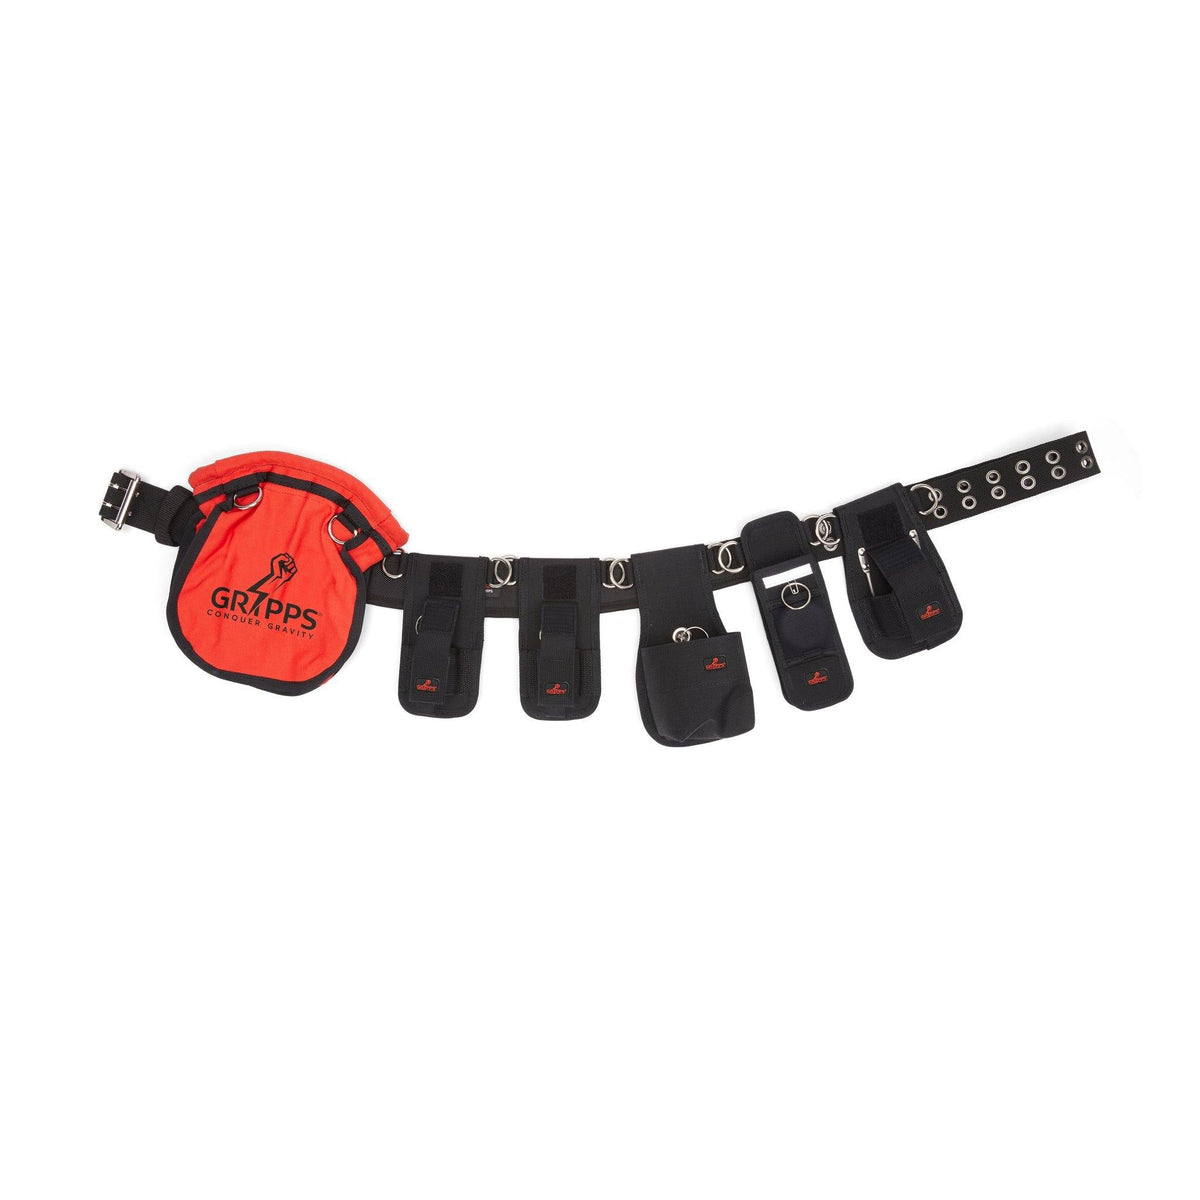 Formworkers Kit - 5 Skin Retractable (Bolt-Safe Pouch Edition) - GRIPPS Global